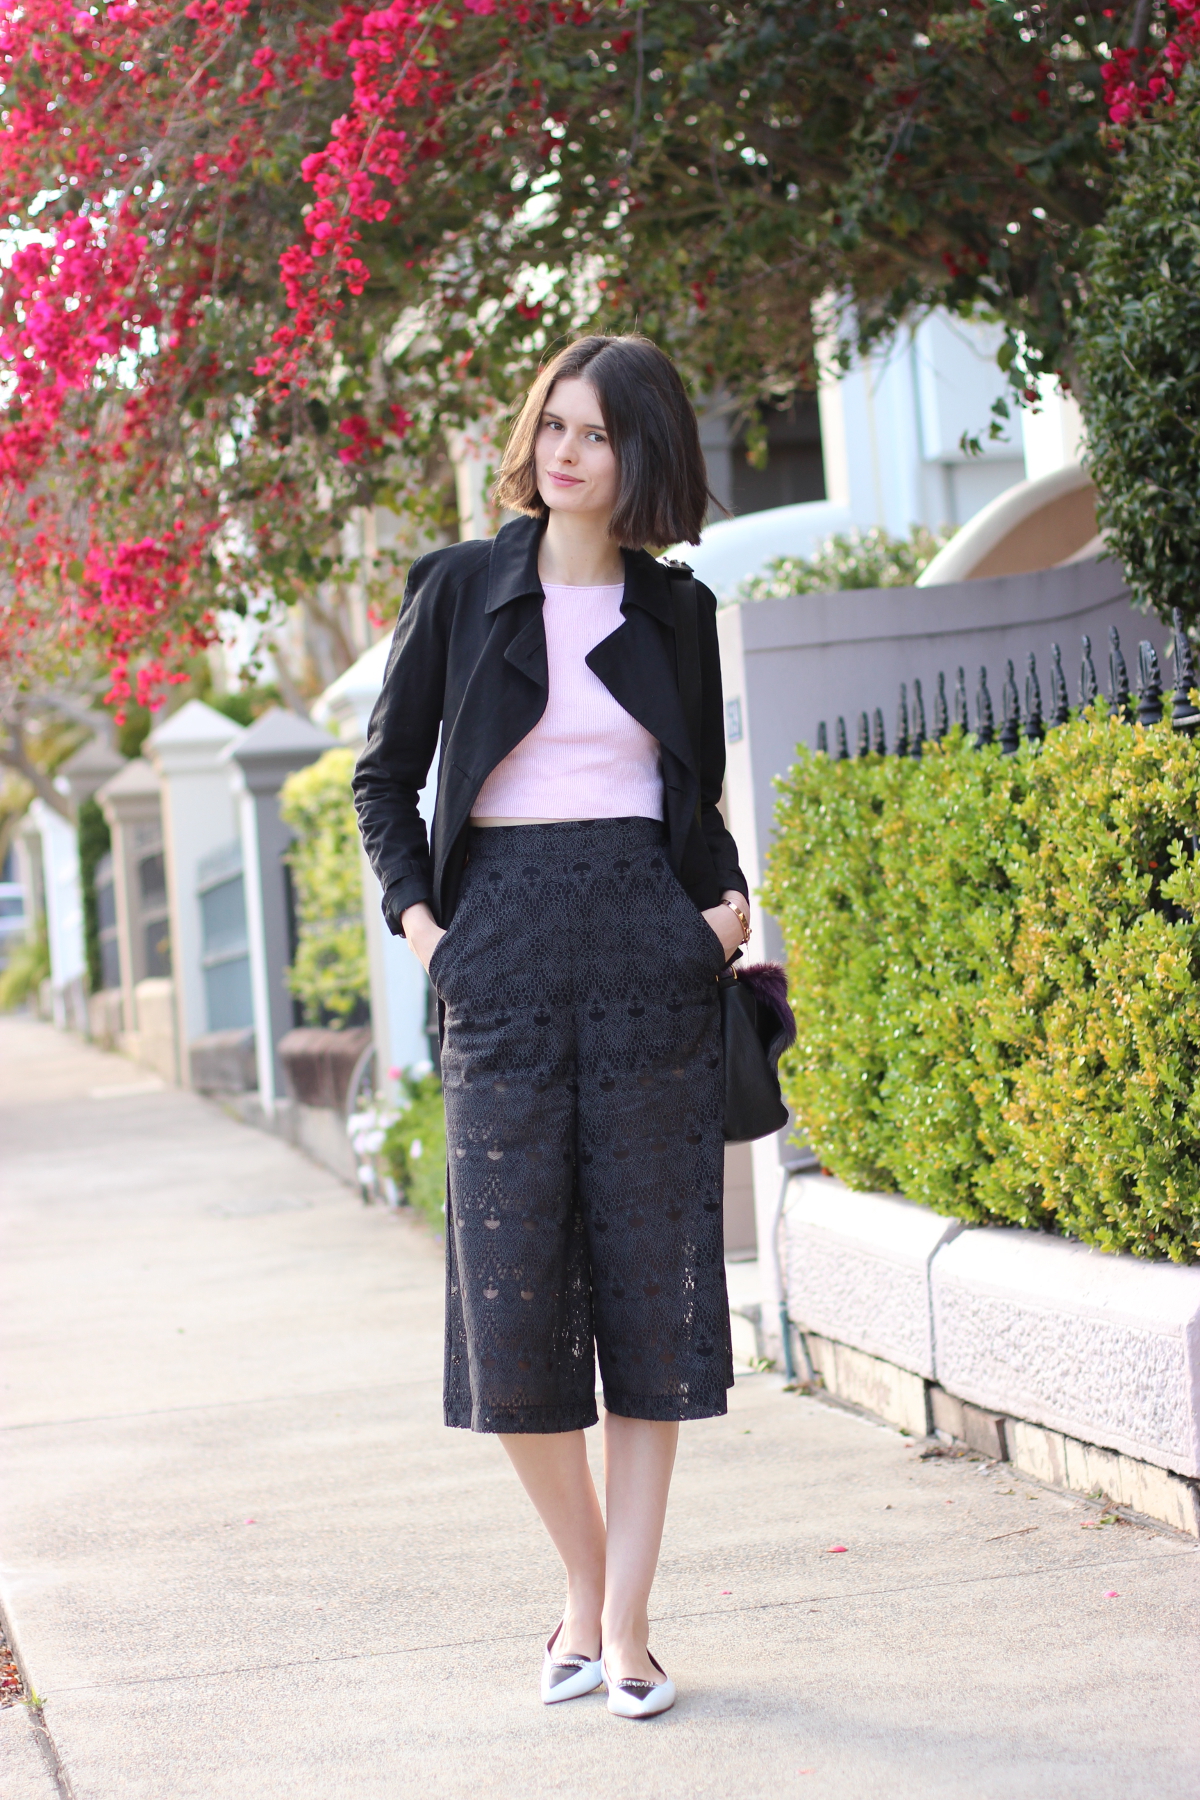 BYCHILL SYDNEY FASHION BLOG Chloe Hill wearing Lilya pink crop knit top, Shona Joy black culottes, Tabitha Simmons Shoes, Deadly Ponies Bag and Acne cropped black trench coat